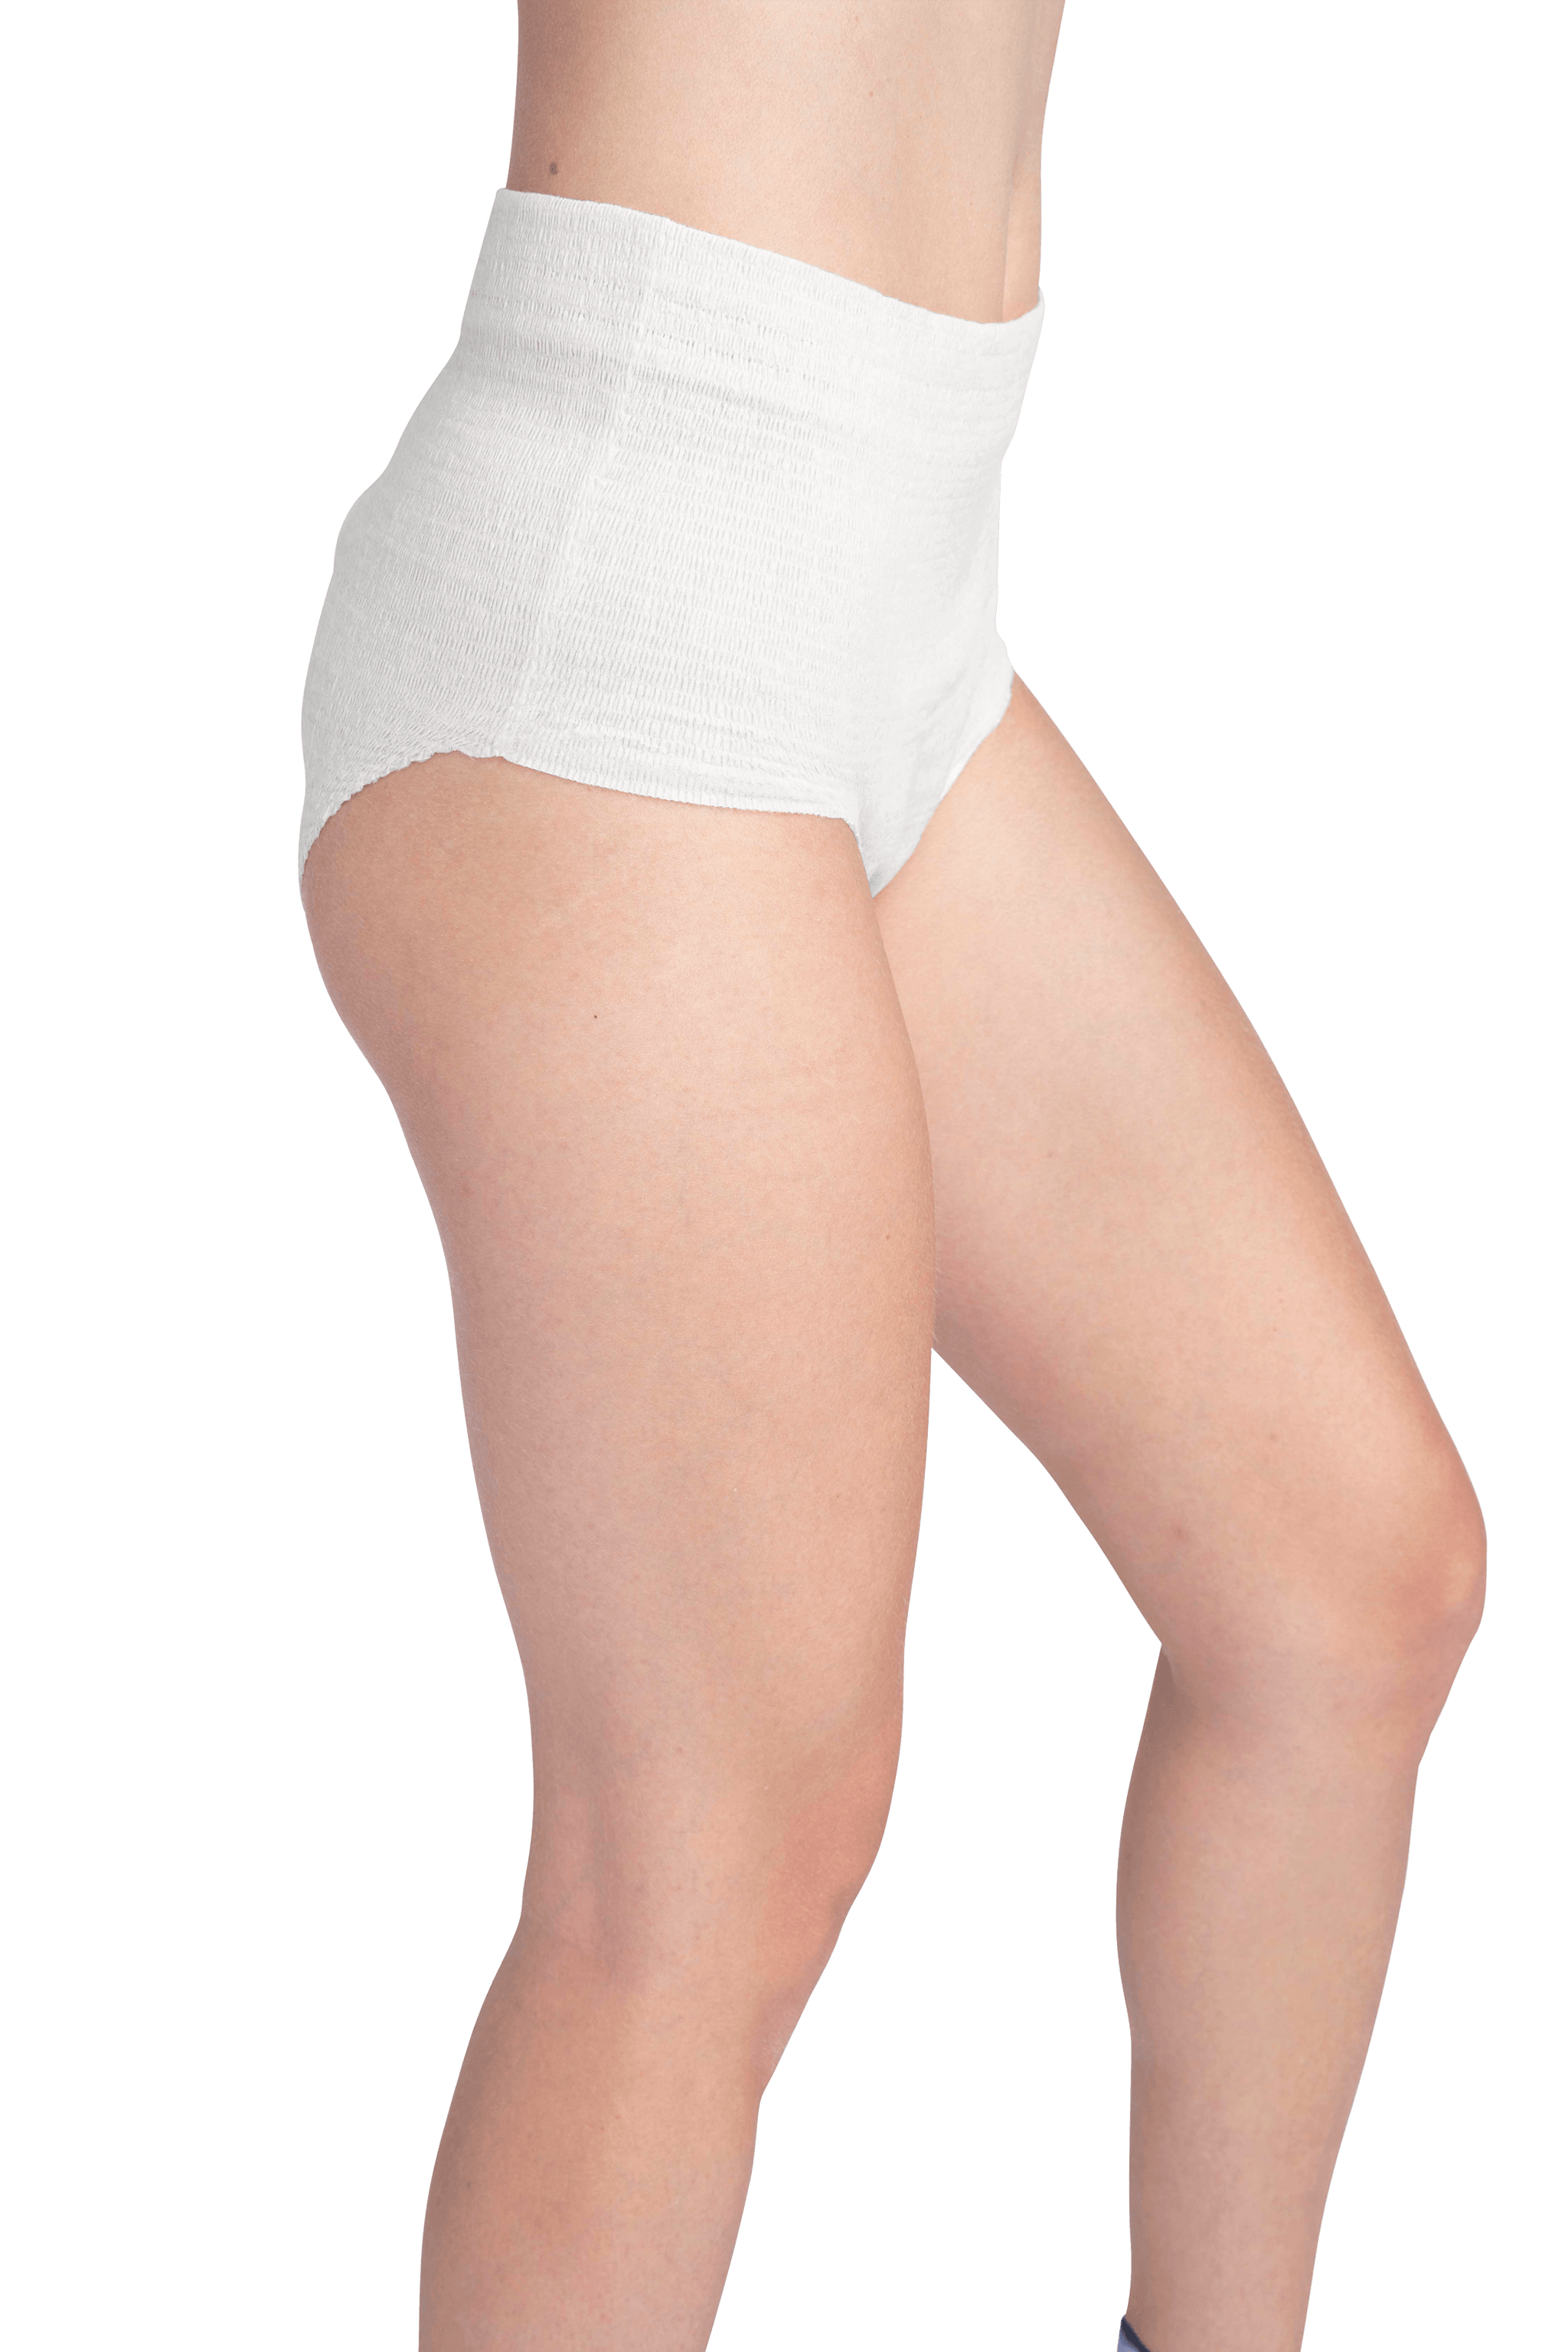 Womens Incontinence Underwear Protective Leakproof Moderate Absorbency –  CARERSPK